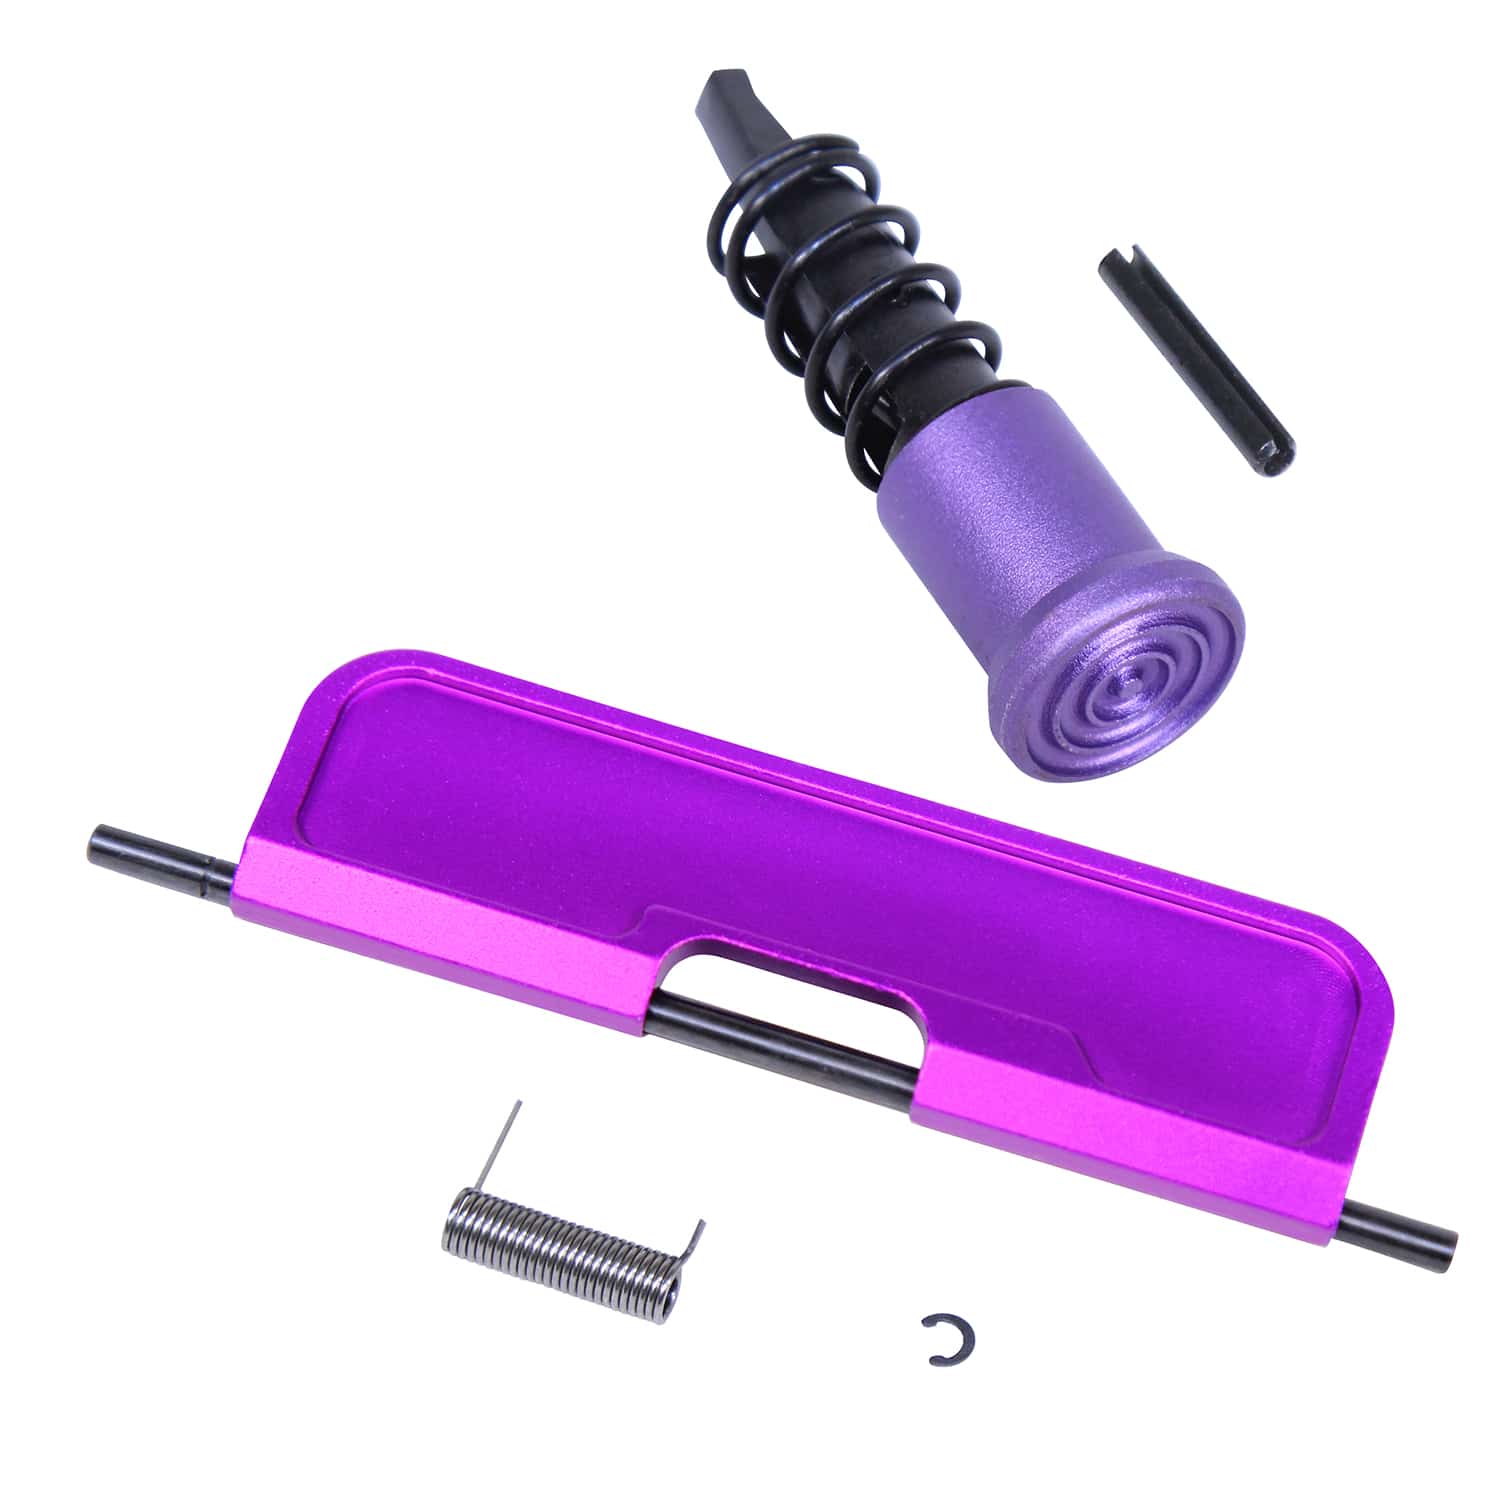 AR-15 Upper Kit With Gen 3 Dust Cover in Anodized Purple